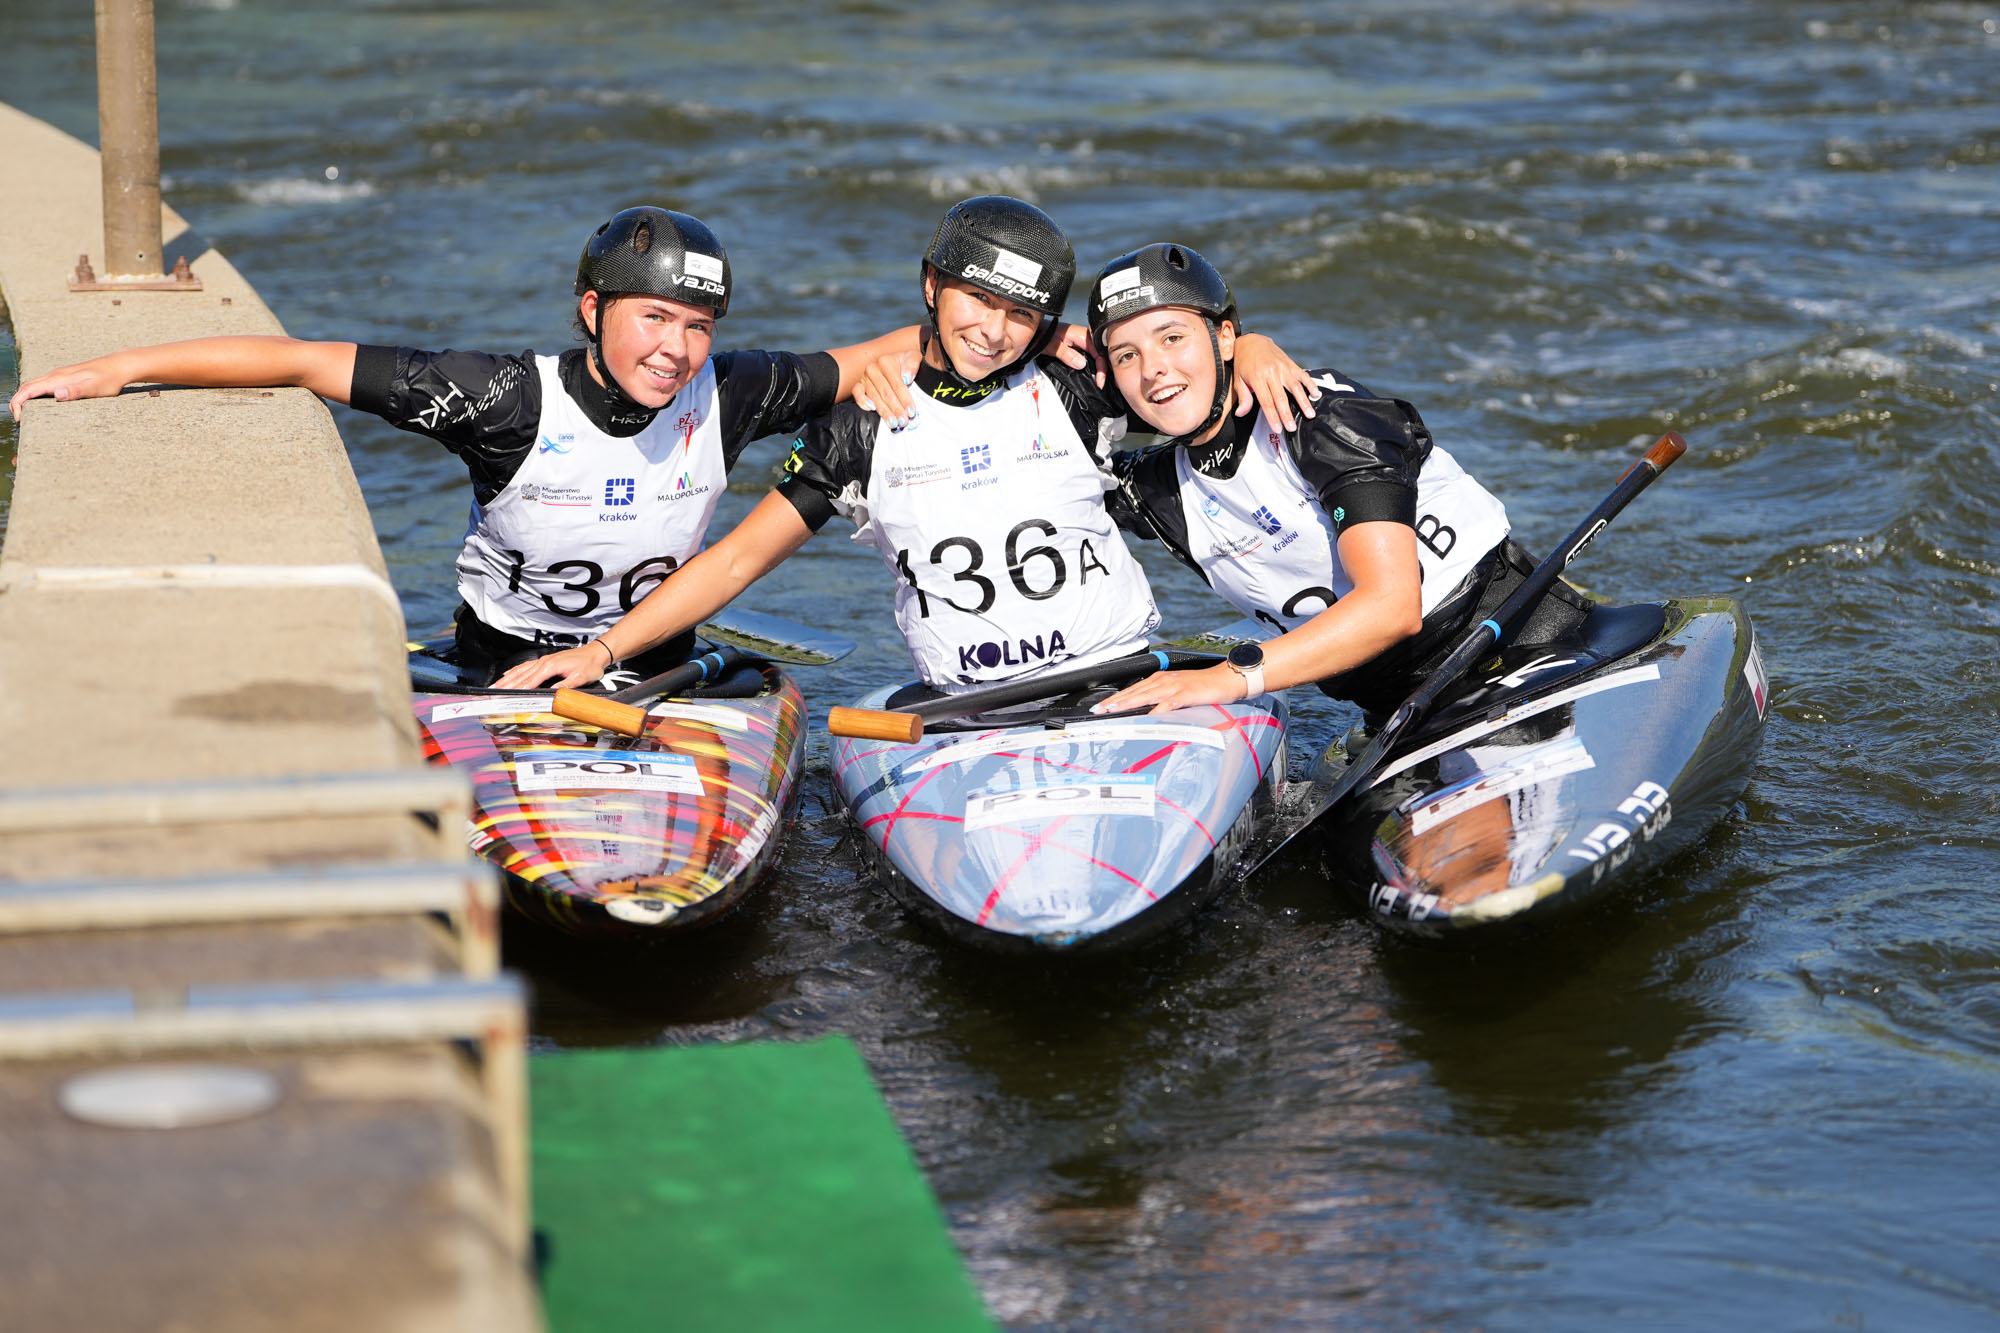 The World Youth Championships in canoe slalom and kayak cross have started in Krakow